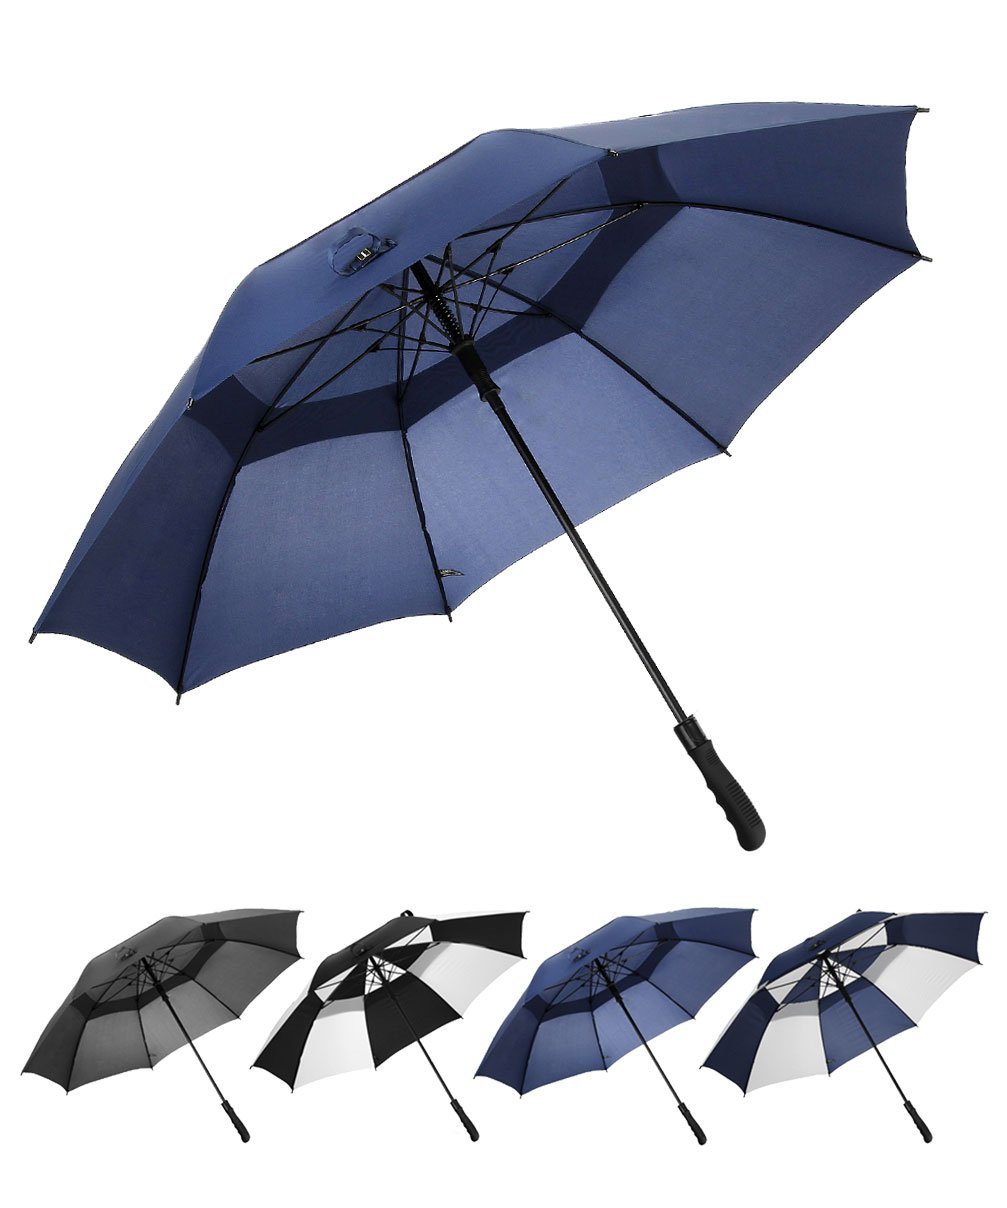 Golf Umbrella Windproof Large 68 Inch Stick Umbrella Double Canopy Vented Automatic Open for Men and Women - Blue